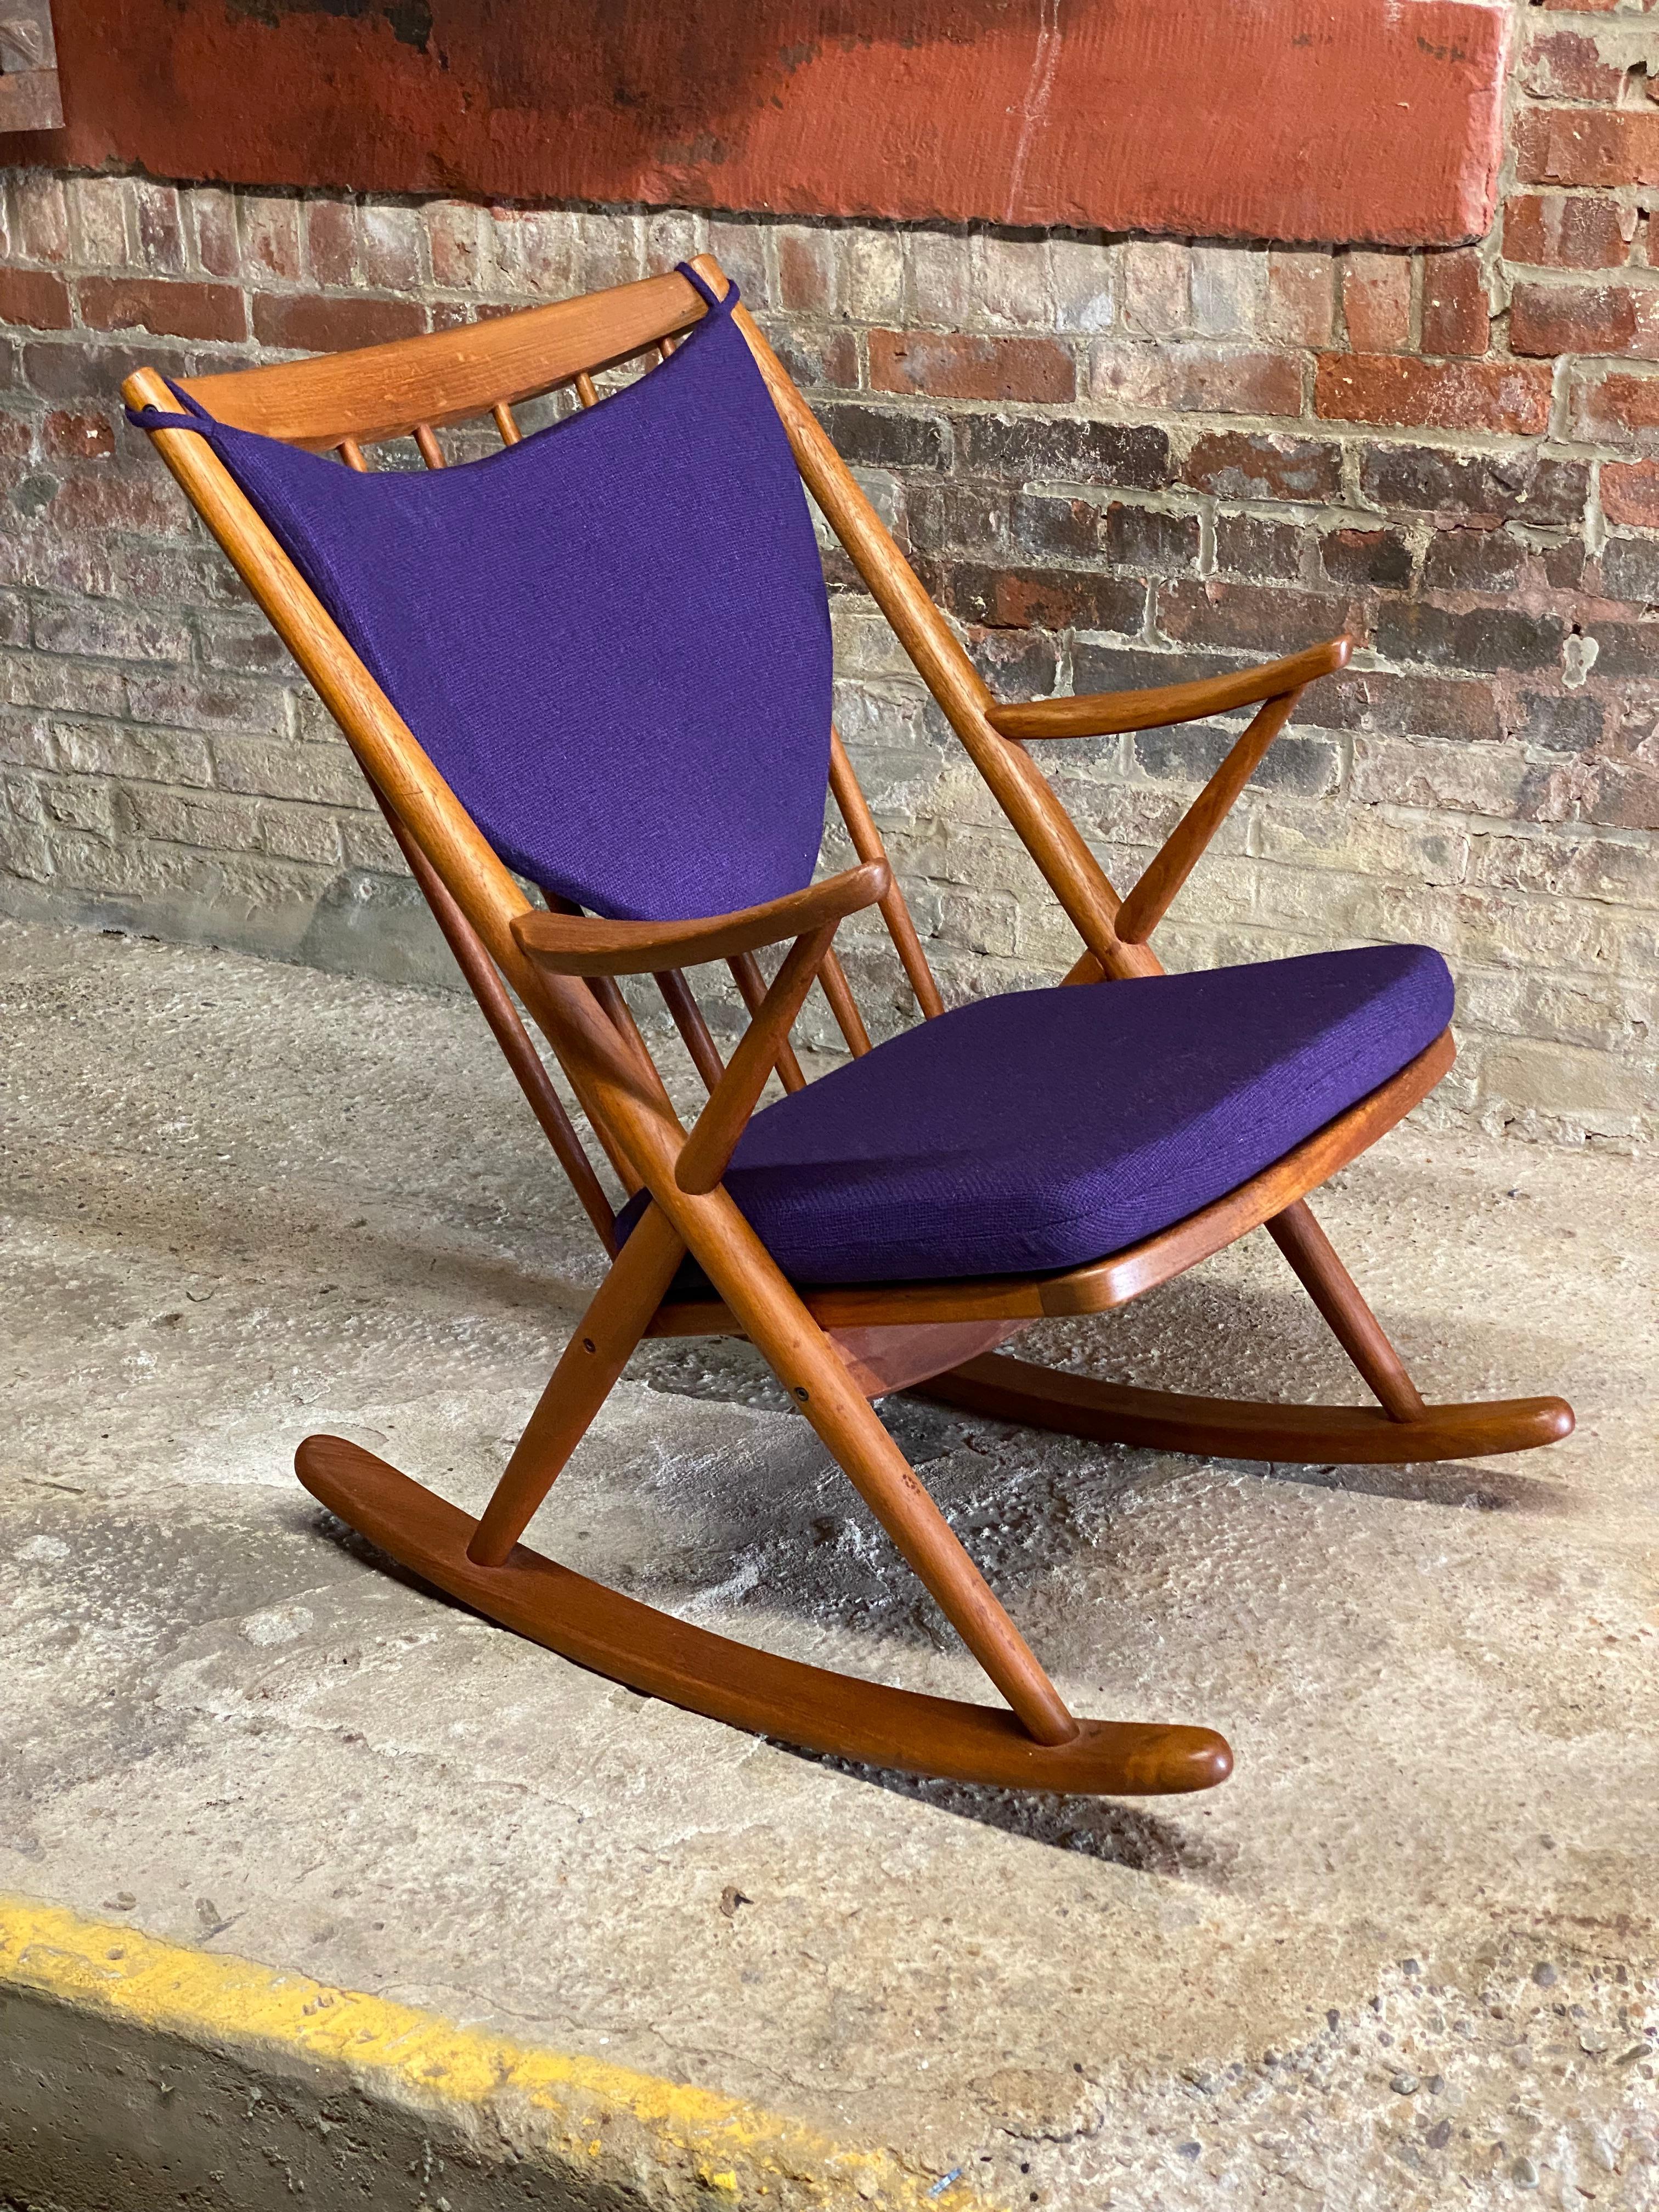 Frank Reenskaug for Bramin teak spindle back. Signed with Barman, Made in Denmark/Danish Control Label. Just a nicely designed chair.

Good overall condition. Structurally sound and sturdy. No visible issues. Some minor cosmetic wear, scuffs, bumps